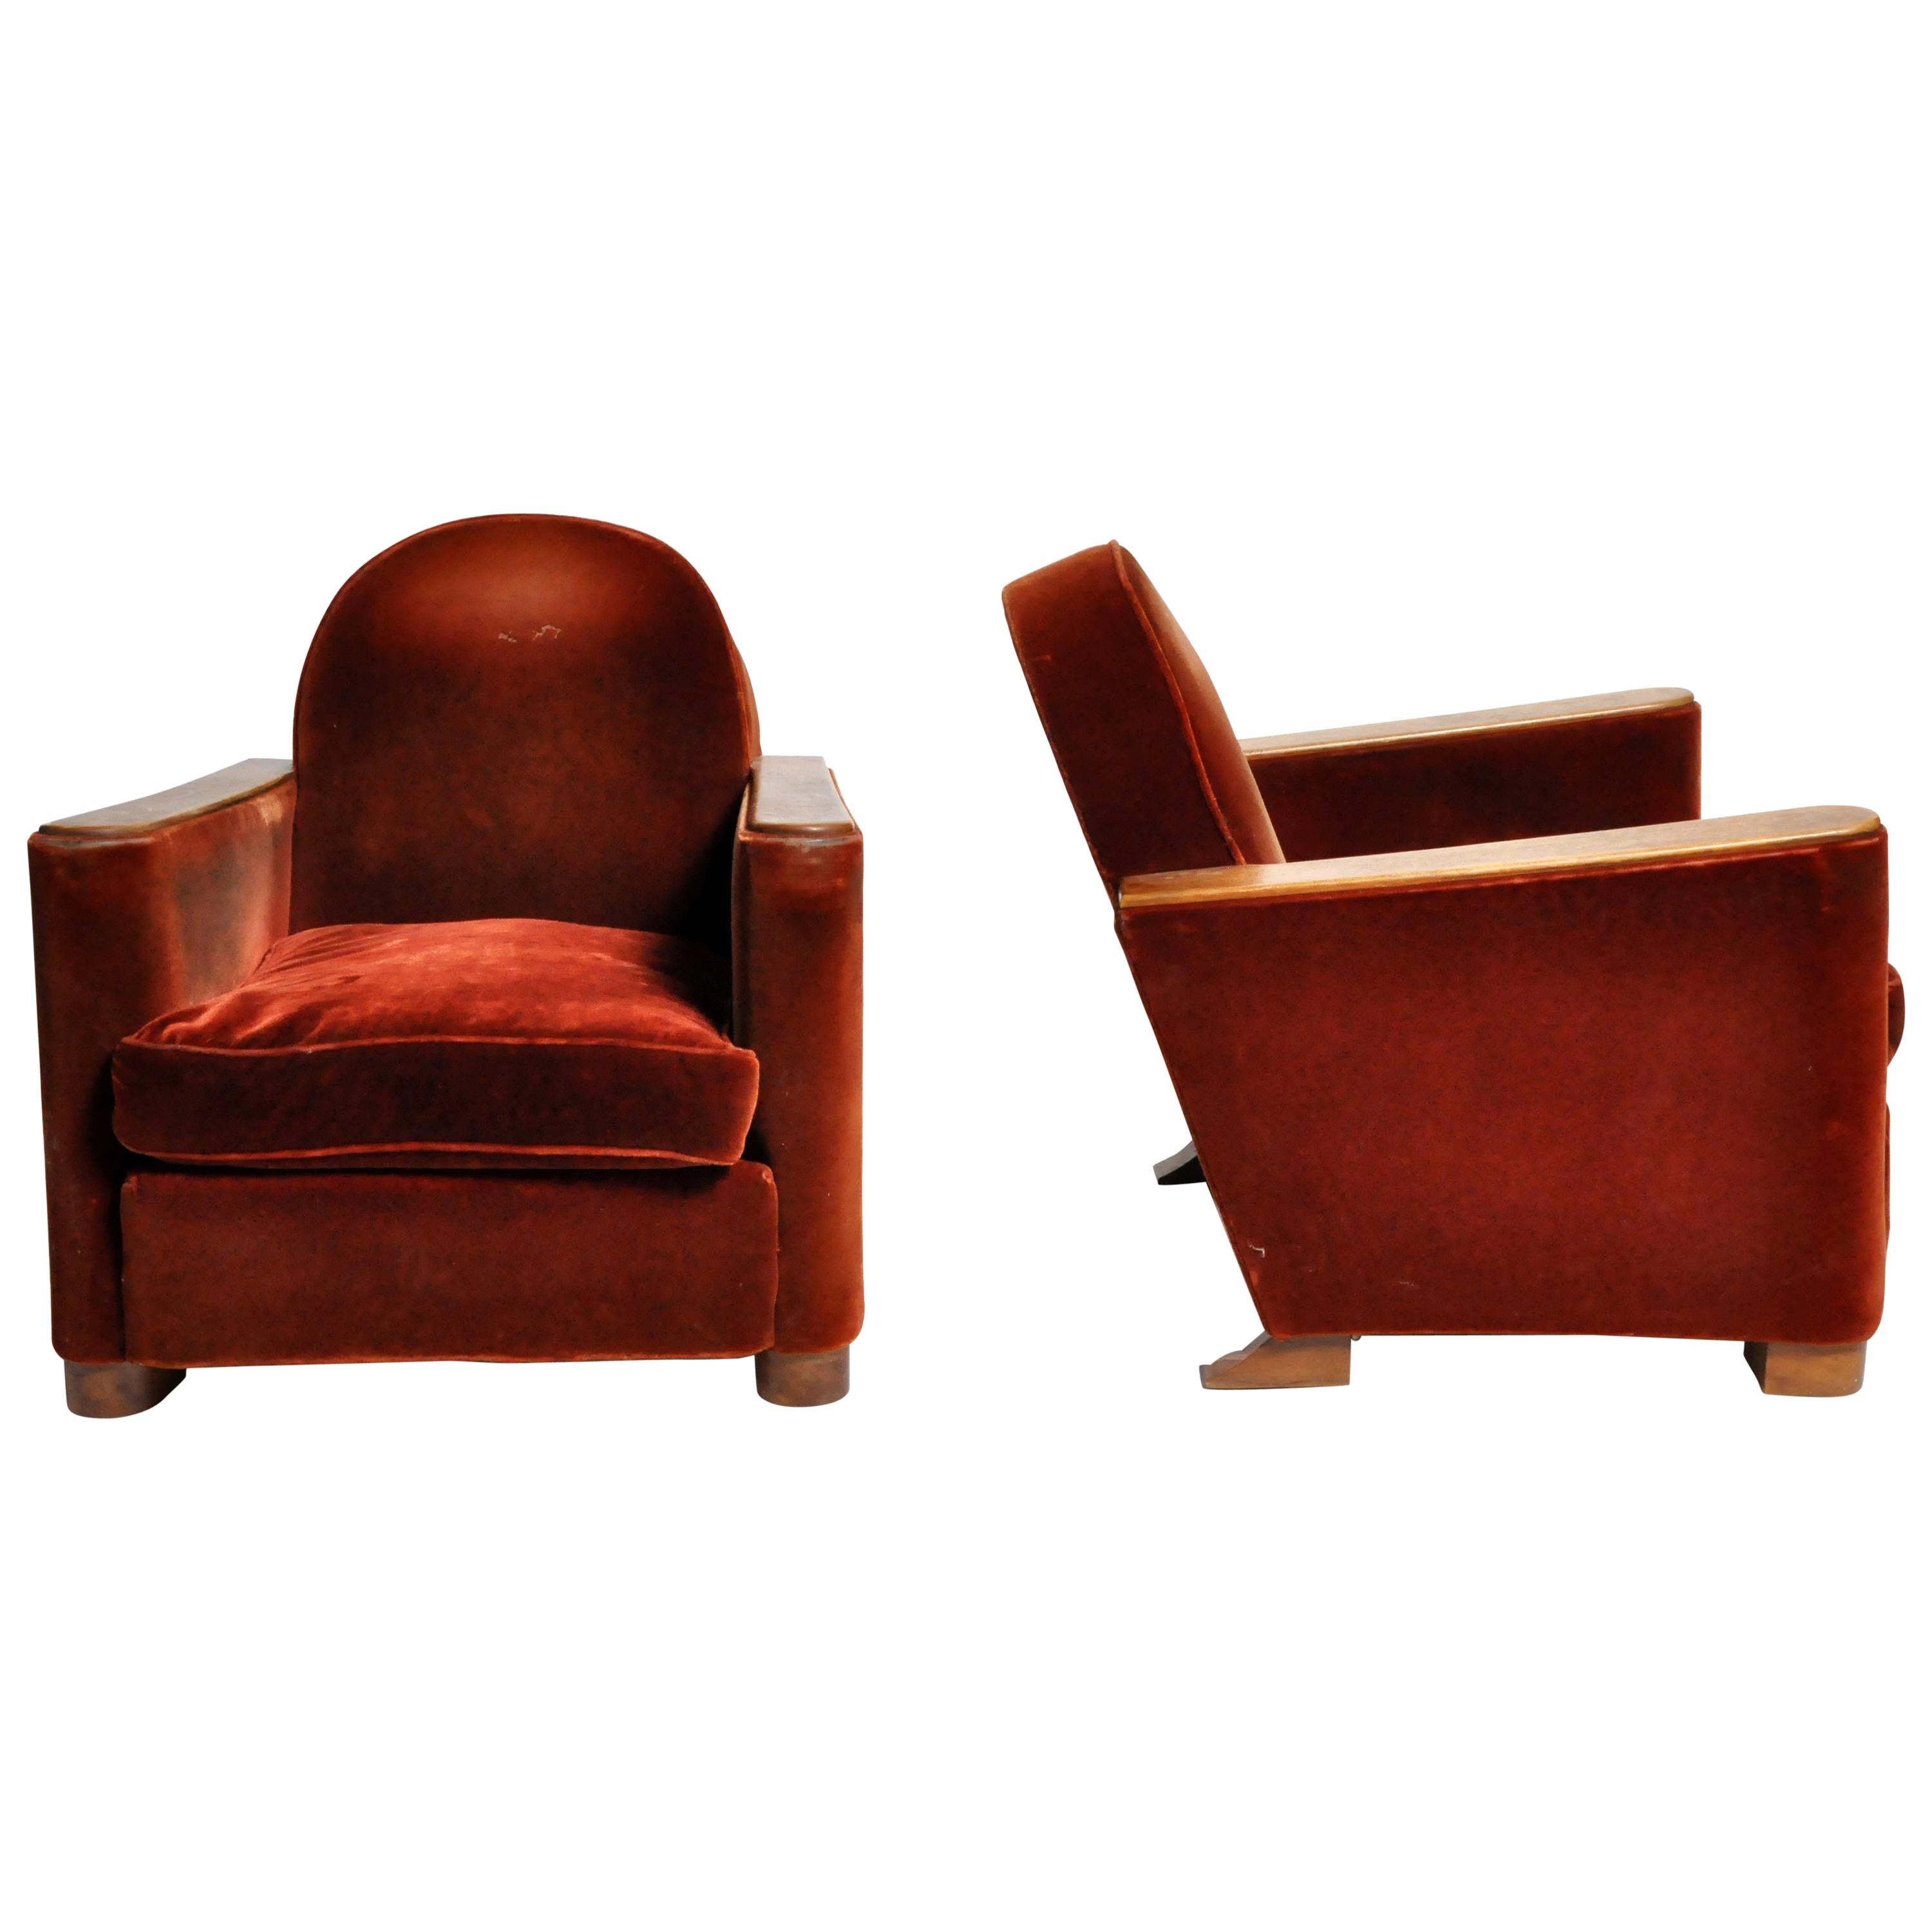 Pair of Art Deco "Streamline" Chairs with Hardwood Arms and Legs